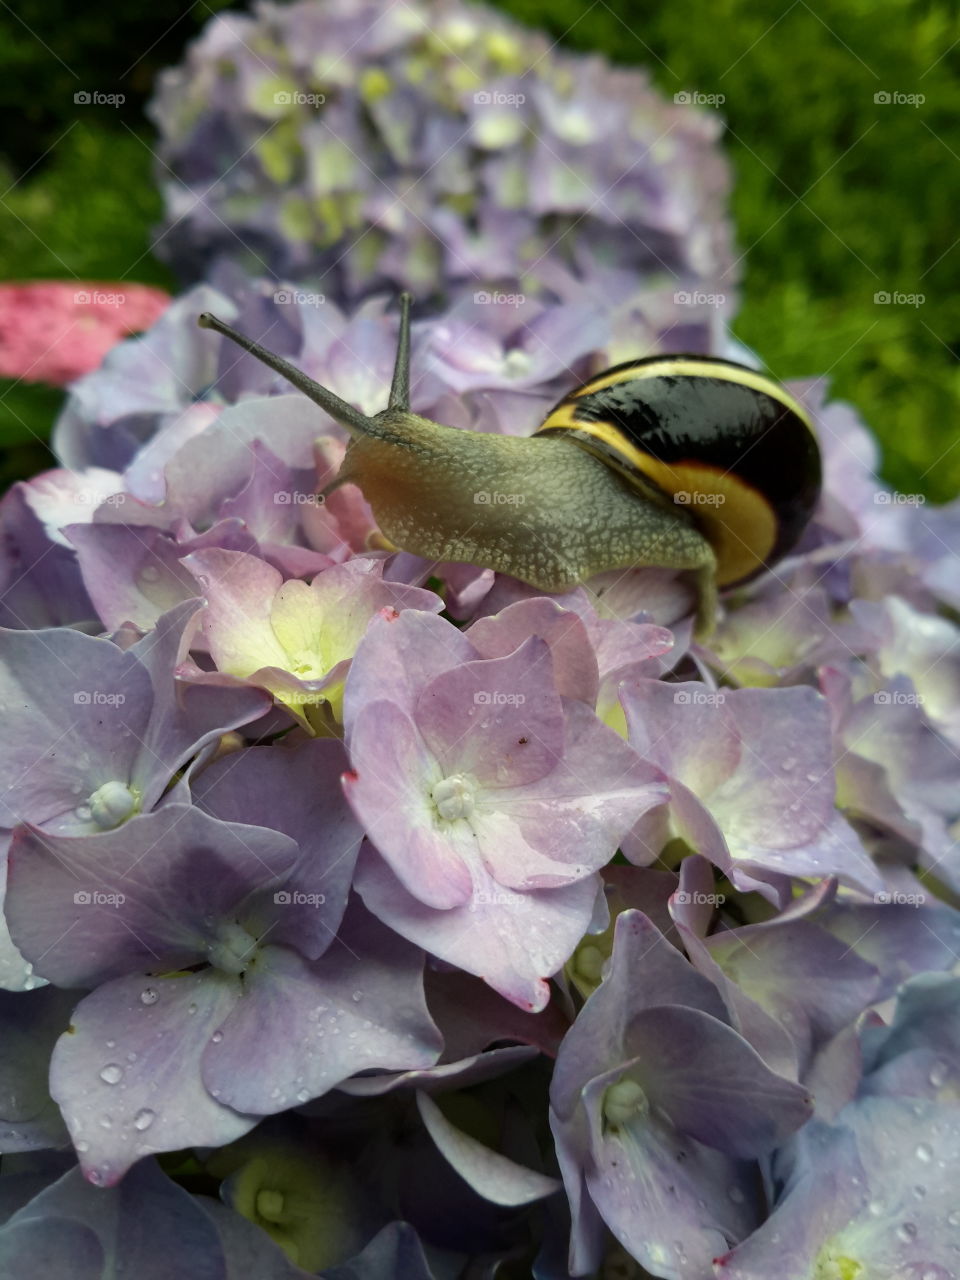 Snail on flowers after rain